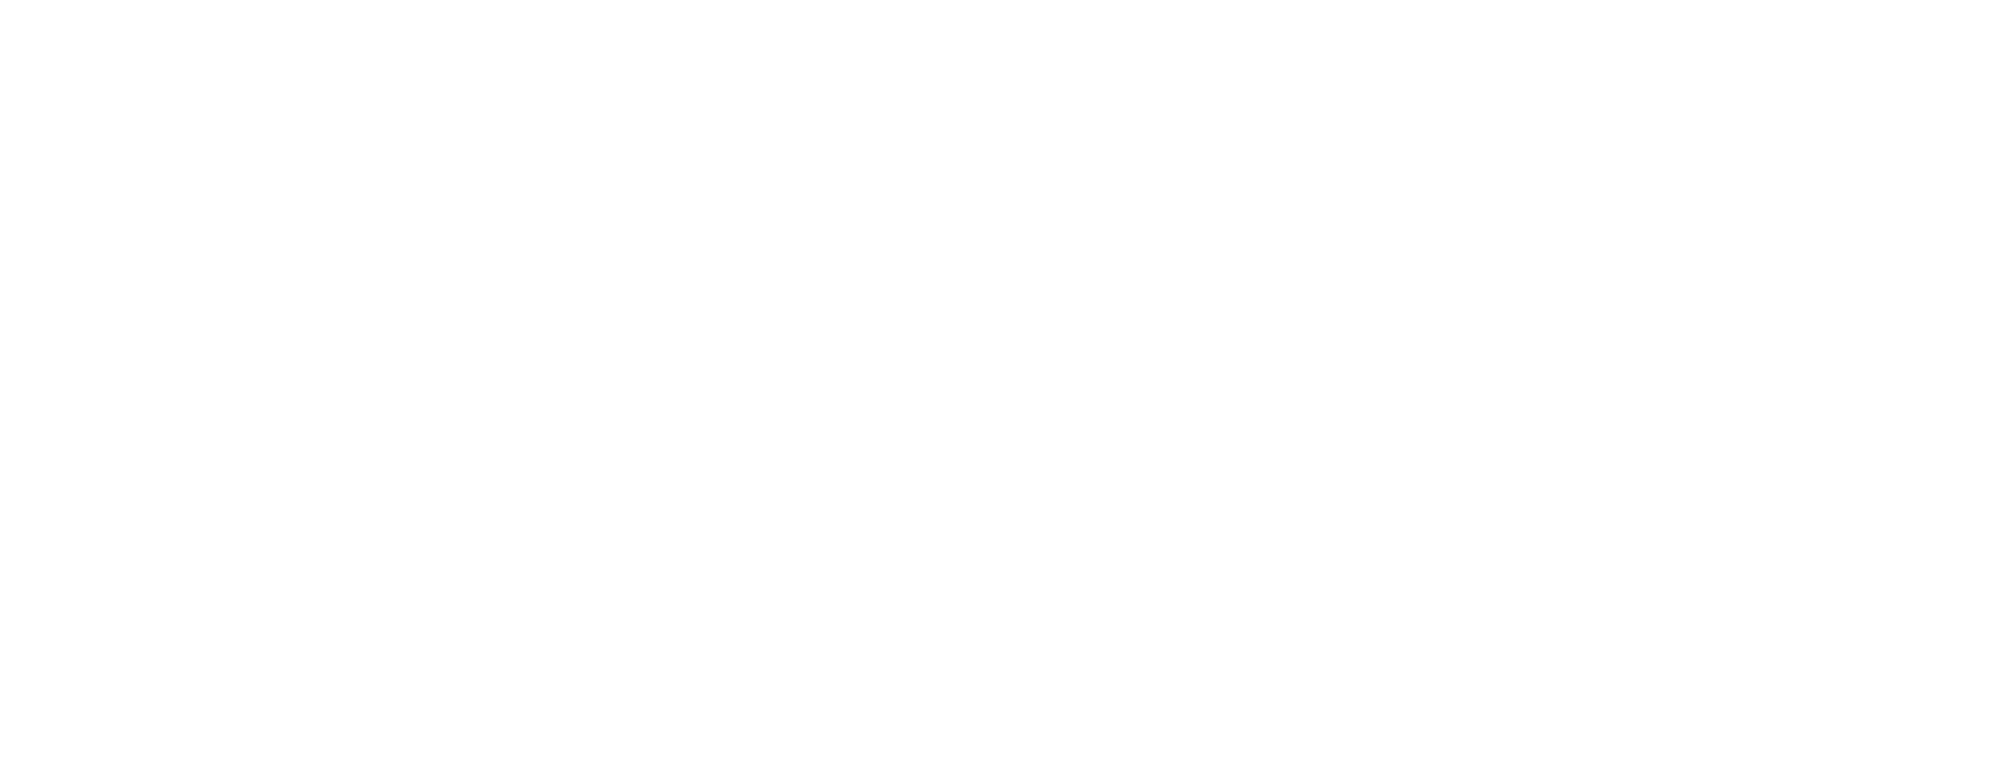 OpenFF Toolkit 0.14.0+0.ga5a90ad5.dirty documentation logo